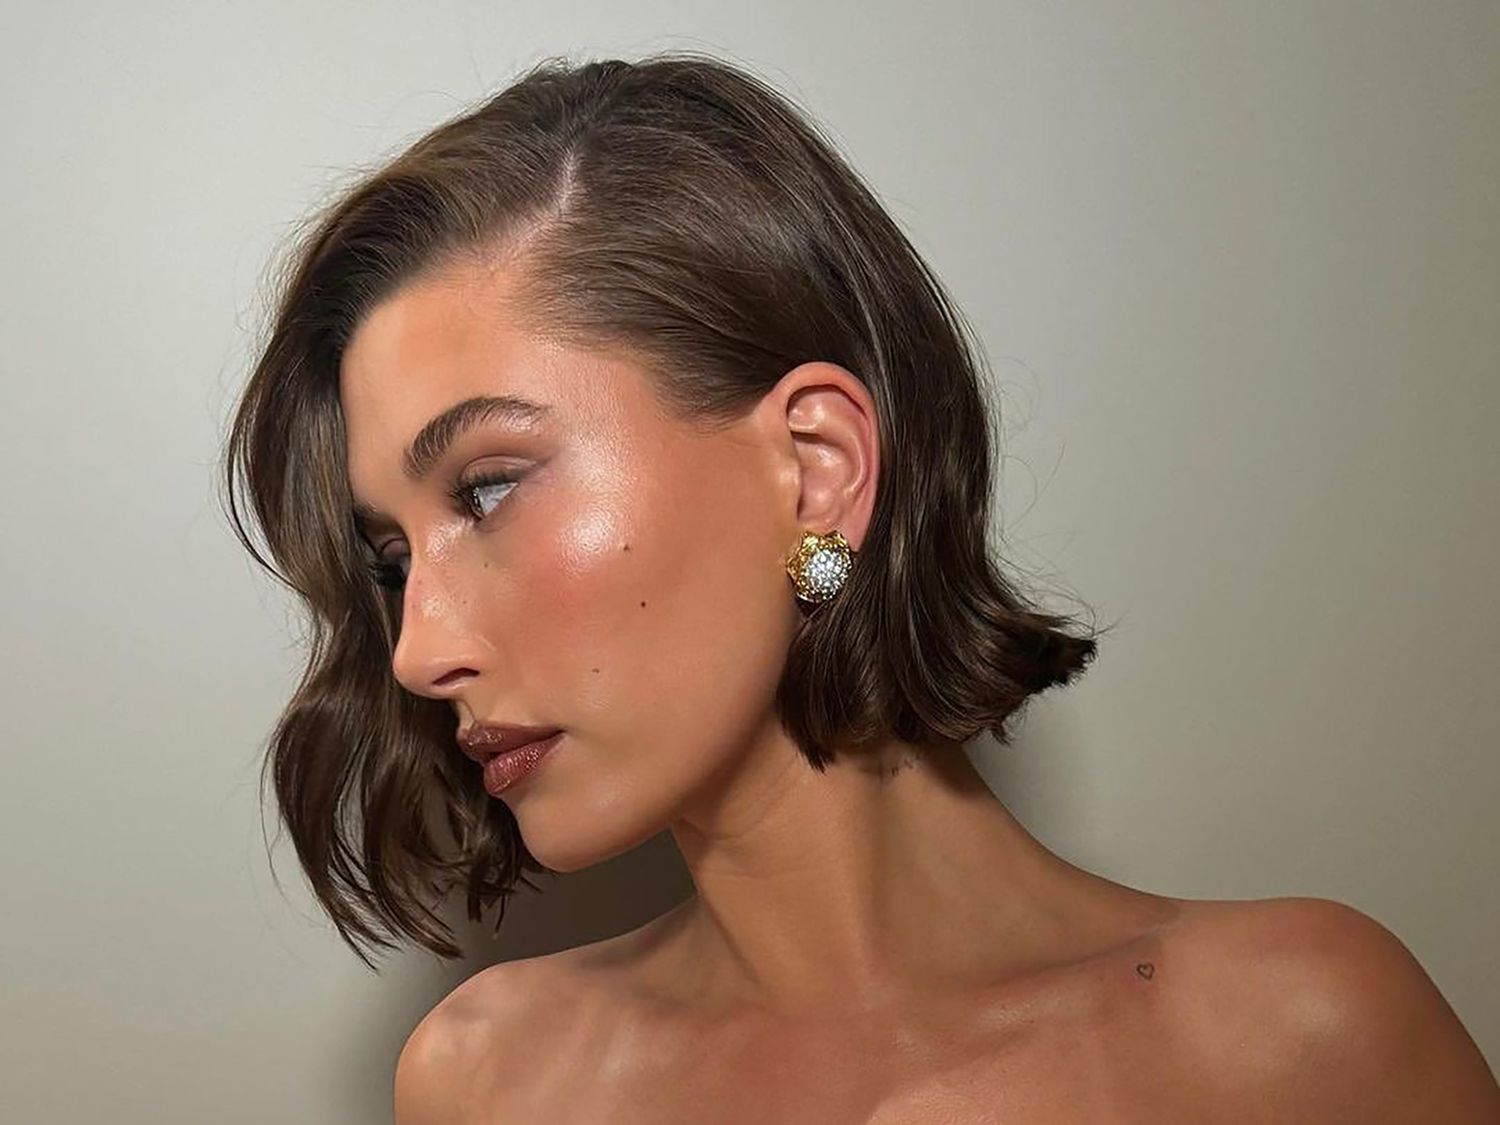 Bobs Are the Trendiest Cut of the Moment—Here’s What to Know Before Getting One